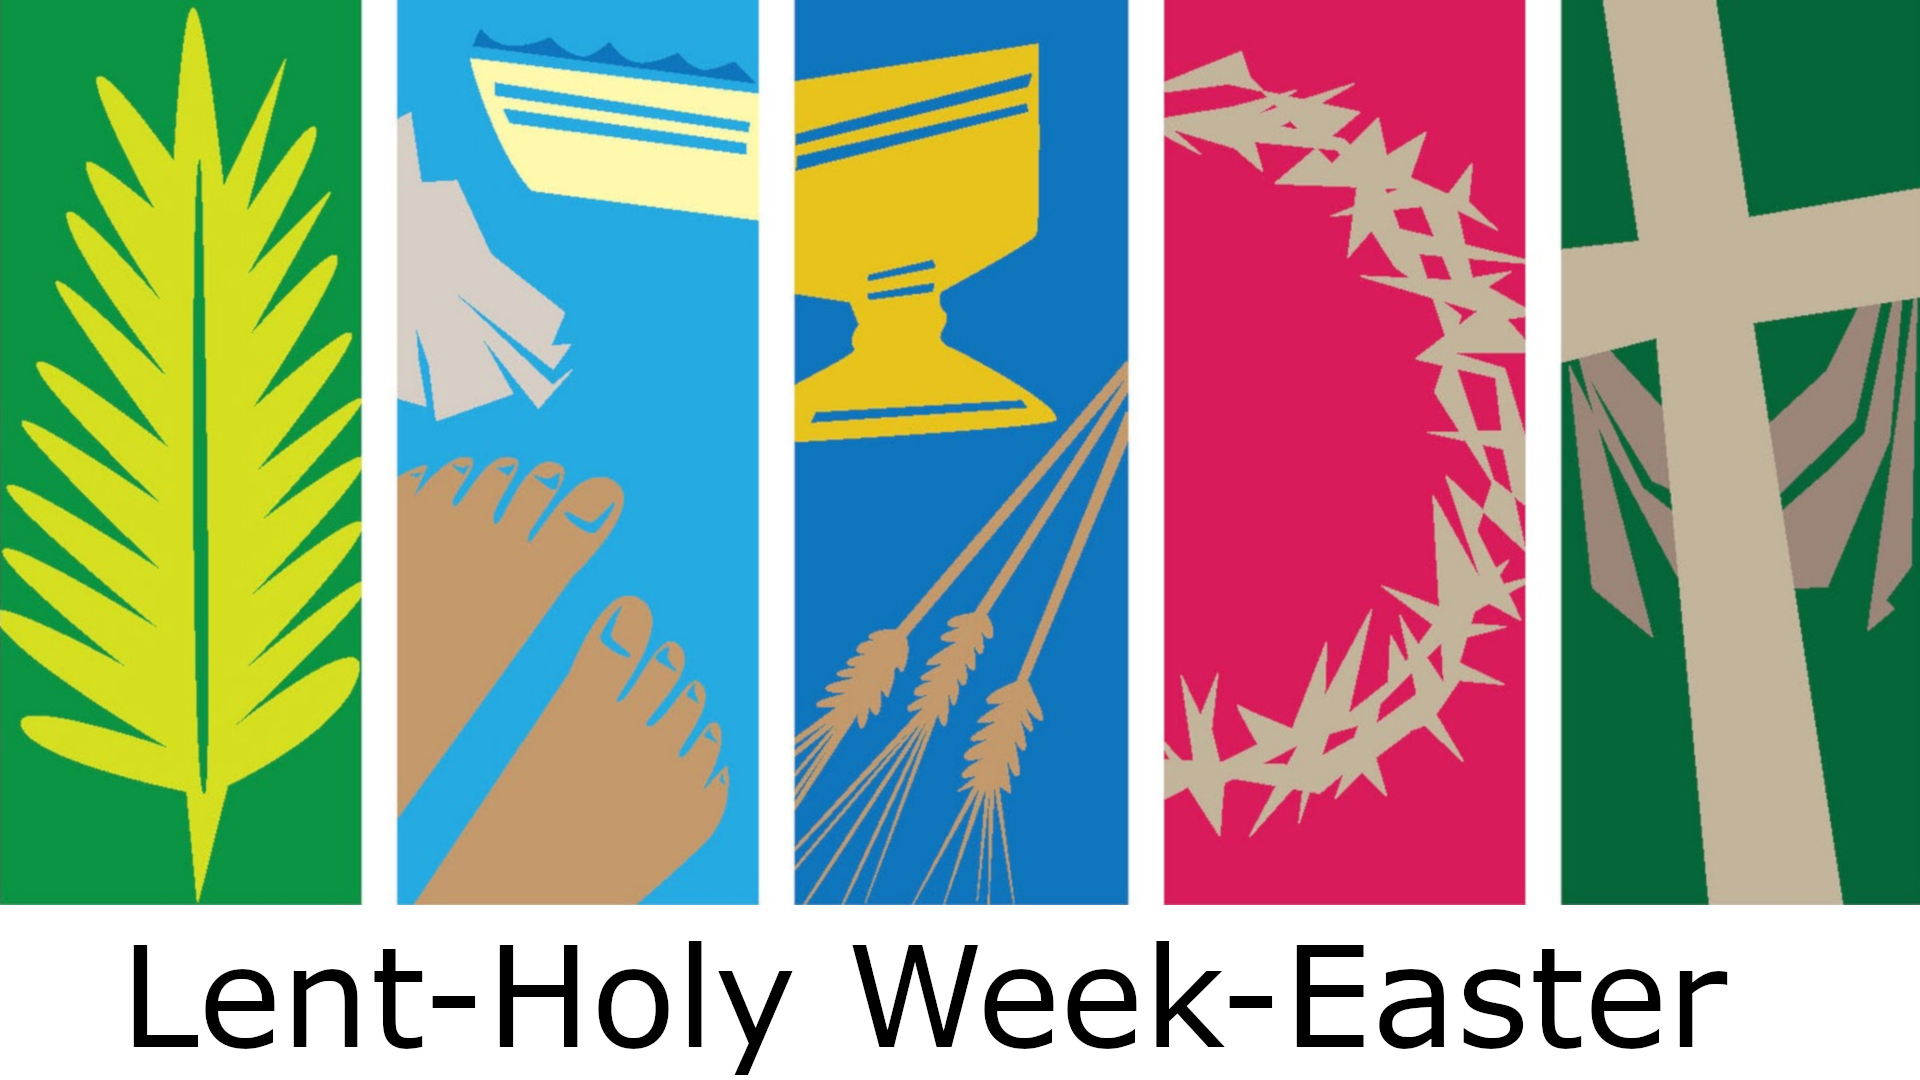 -Lent, Holy Week, and Easter Worship Services and Readings